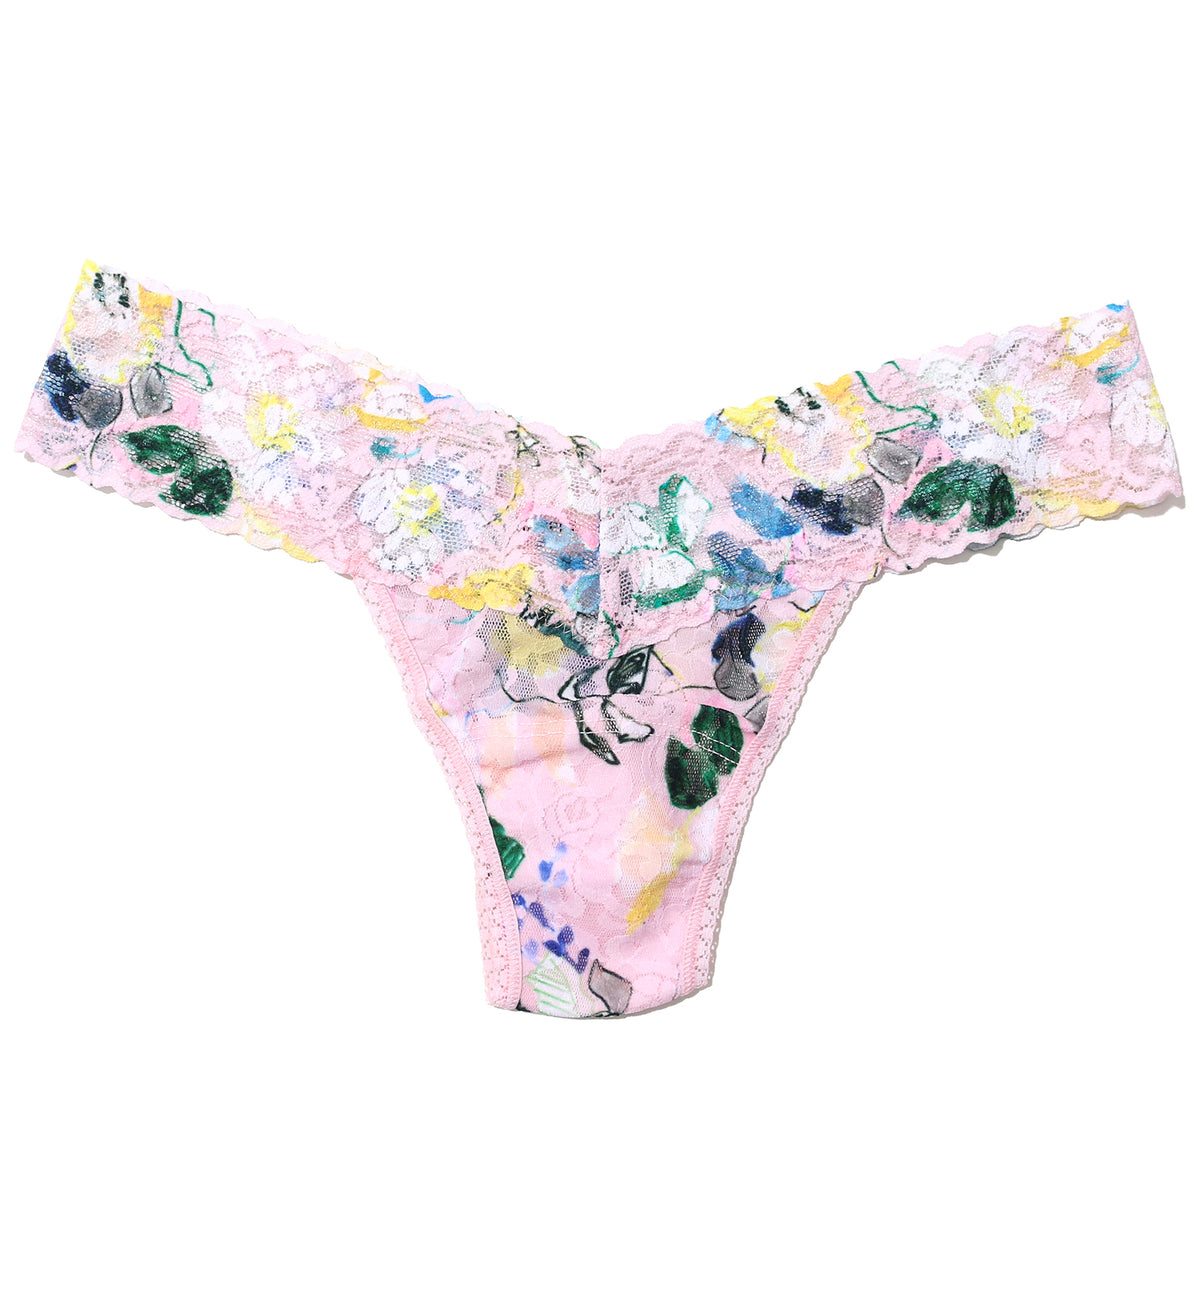 Hanky Panky Signature Lace Printed Low Rise Thong (PR4911P),Cannes You Believe It - Cannes You Believe It,One Size